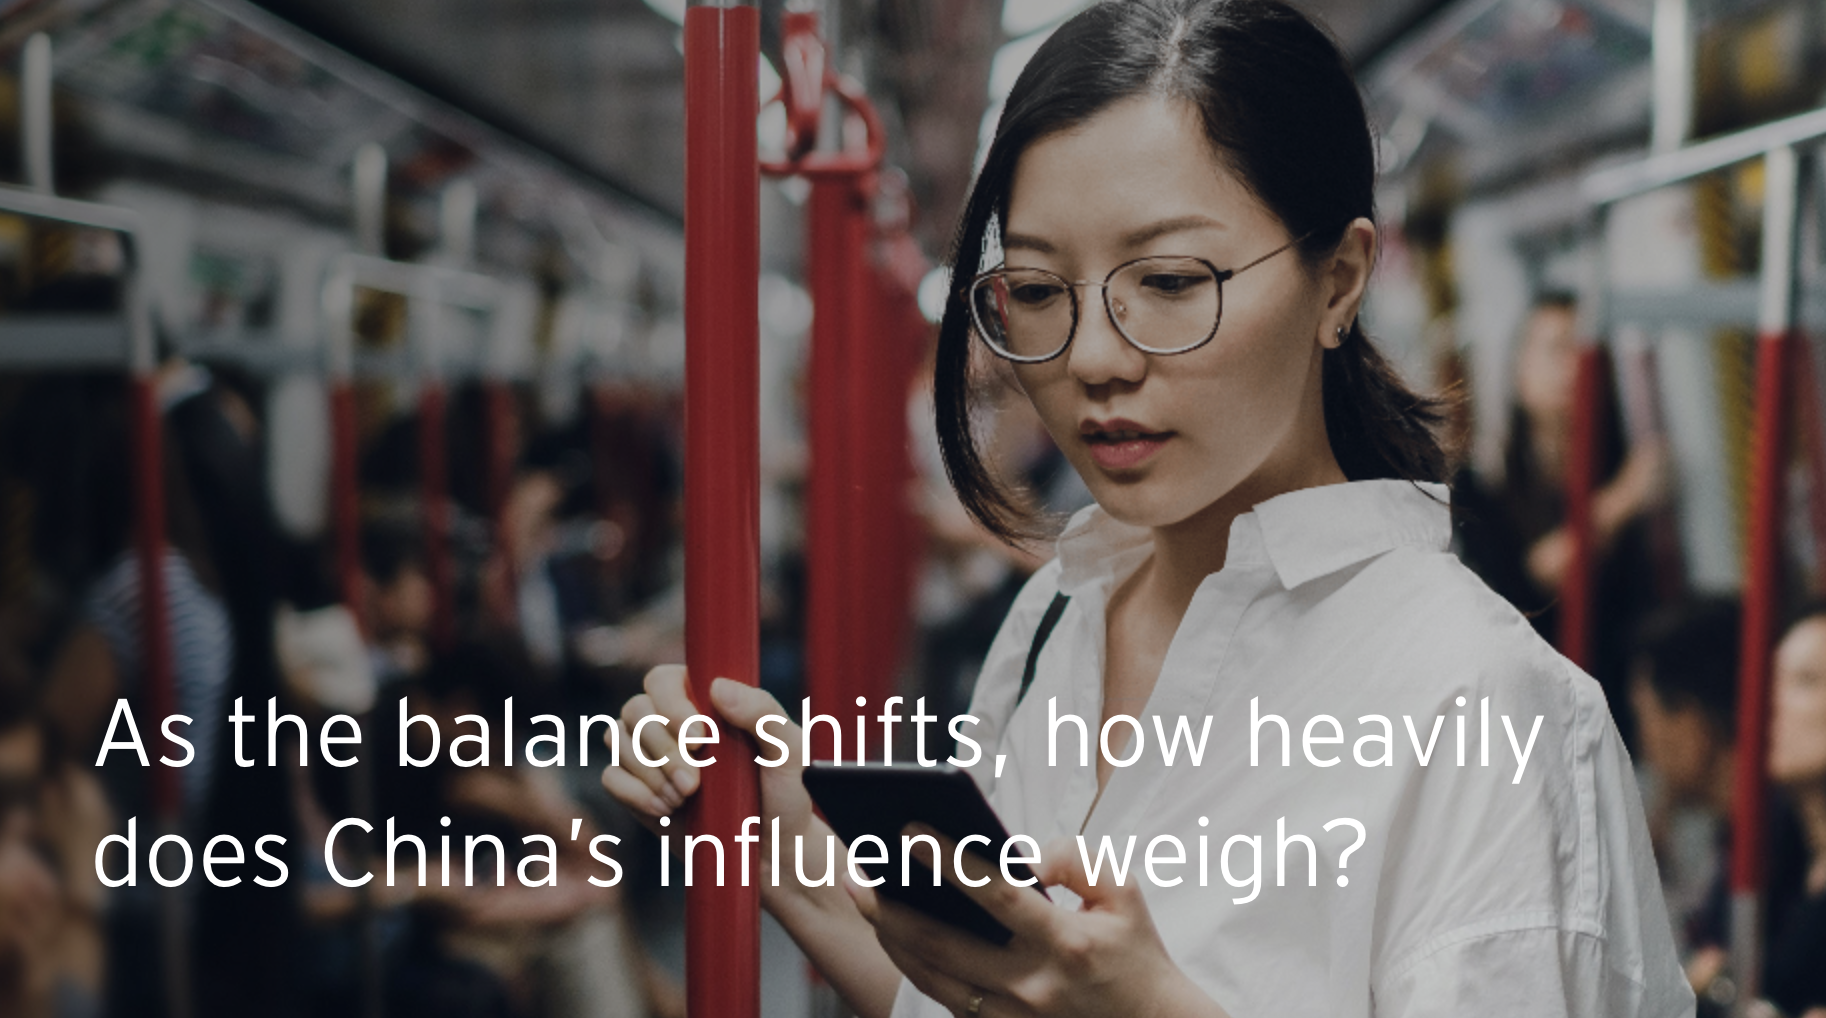 As the balance shifts, how heavily does China’s influence weigh?